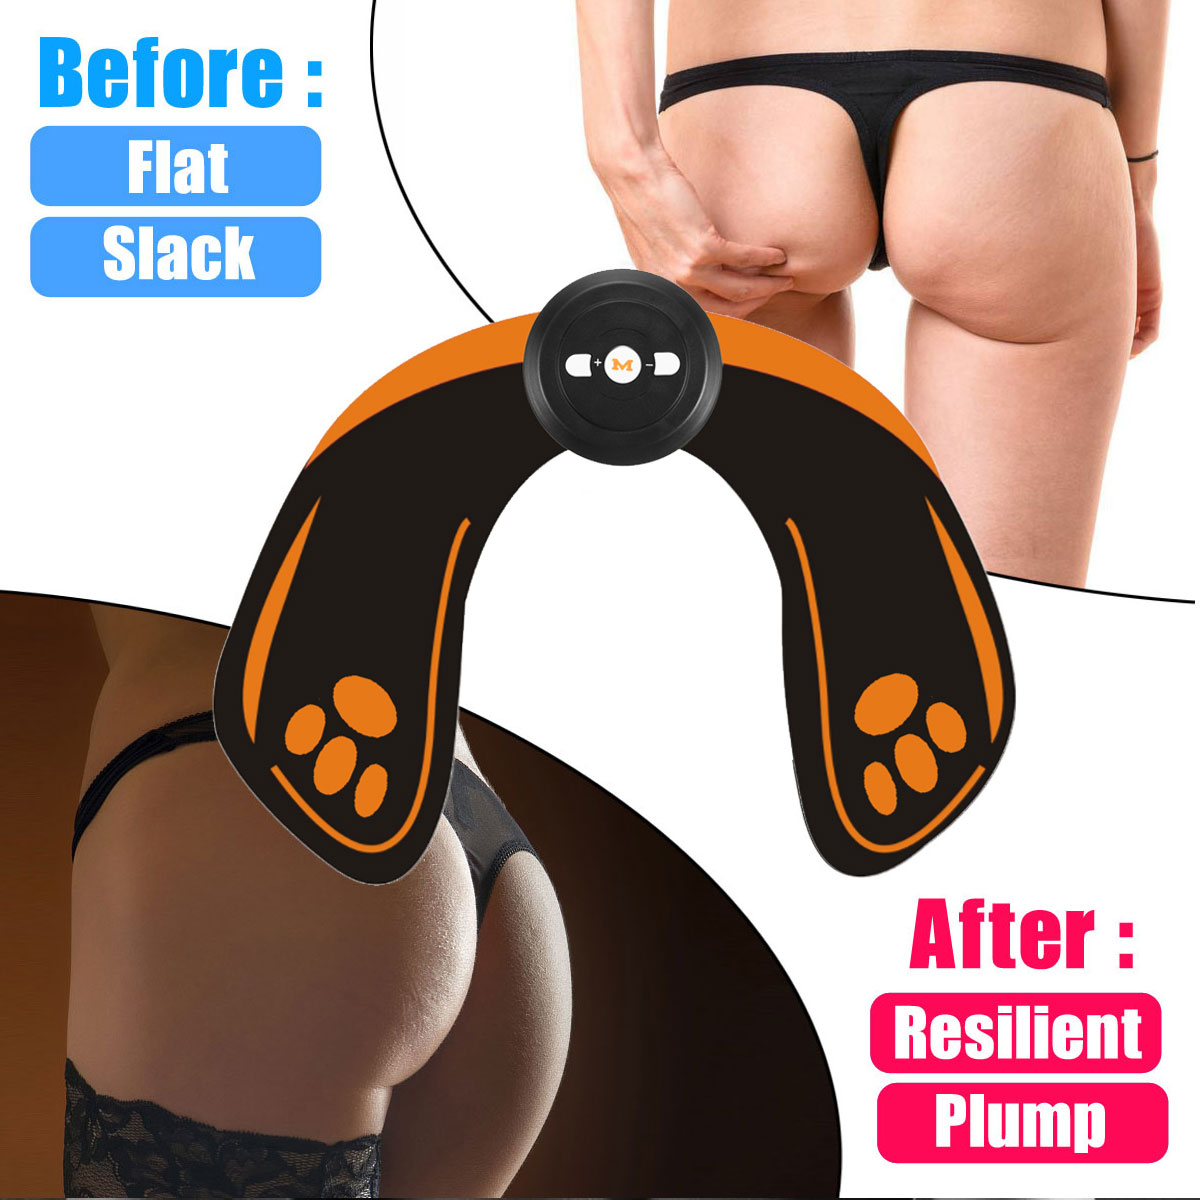 KALOAD-EMS-Rechargeable-Hip-Trainer-ABS-Body-Muscle-Stimulation-Training-Buttocks-Lifting-Up-Massage-1321160